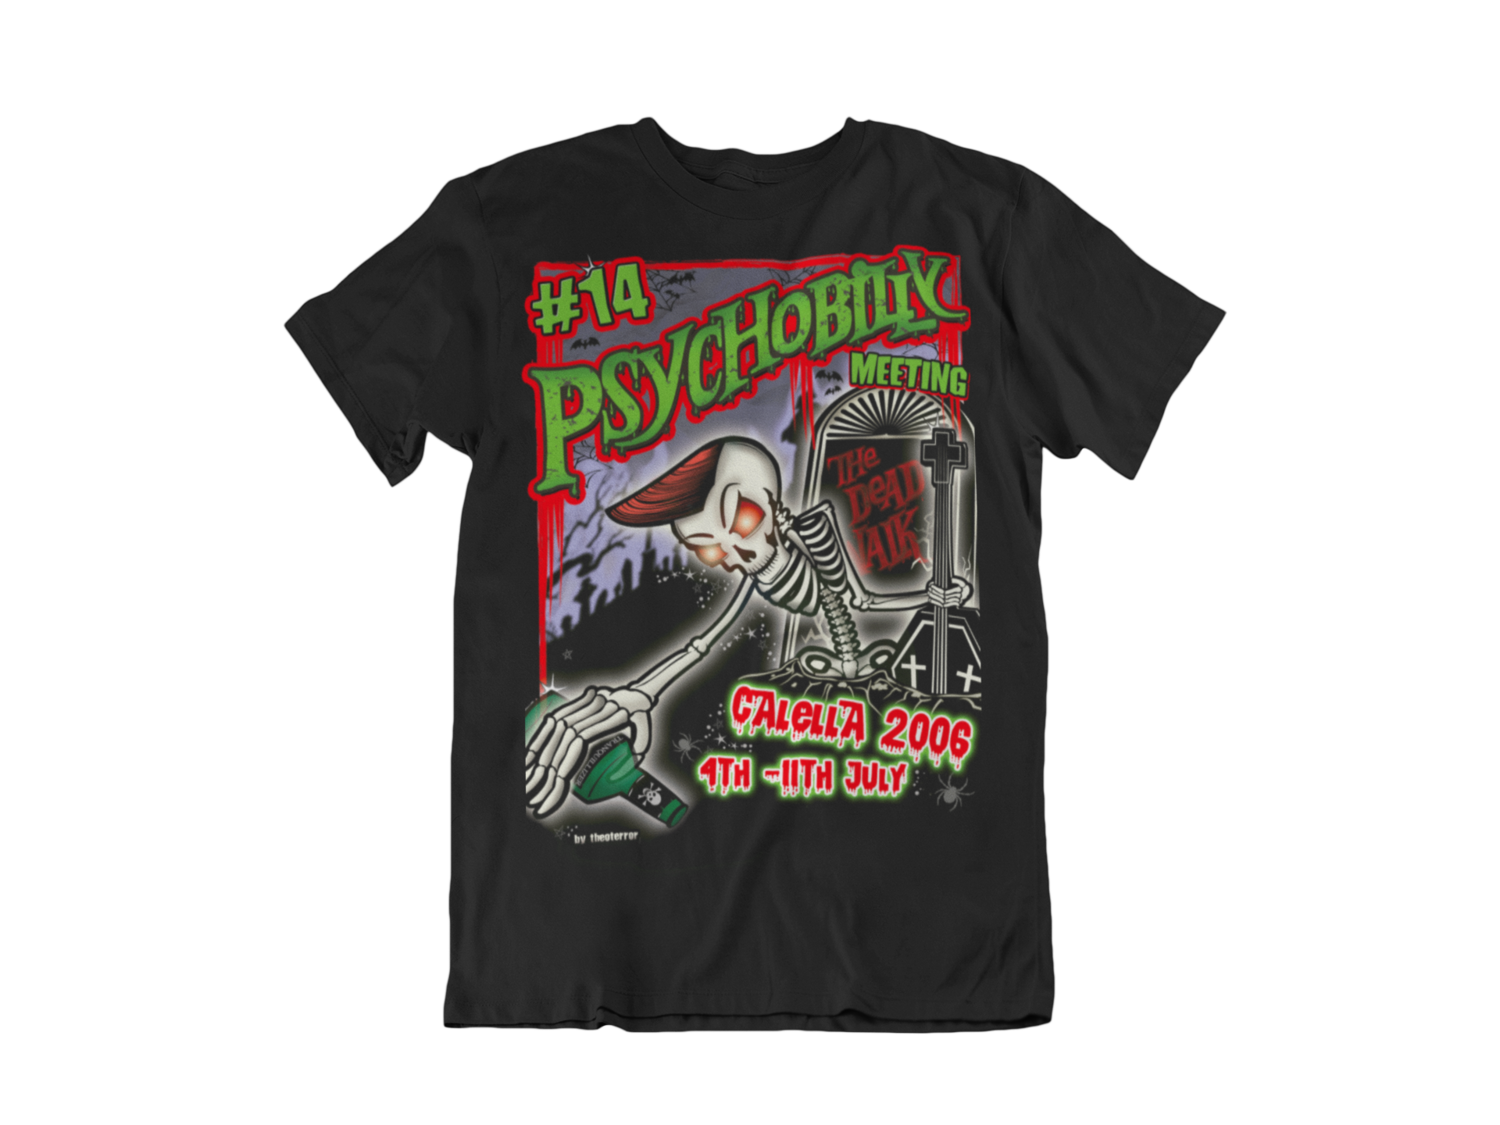 PSYCHOBILLY MEETING 2006 T-SHIRT MEN by THEO TERROR